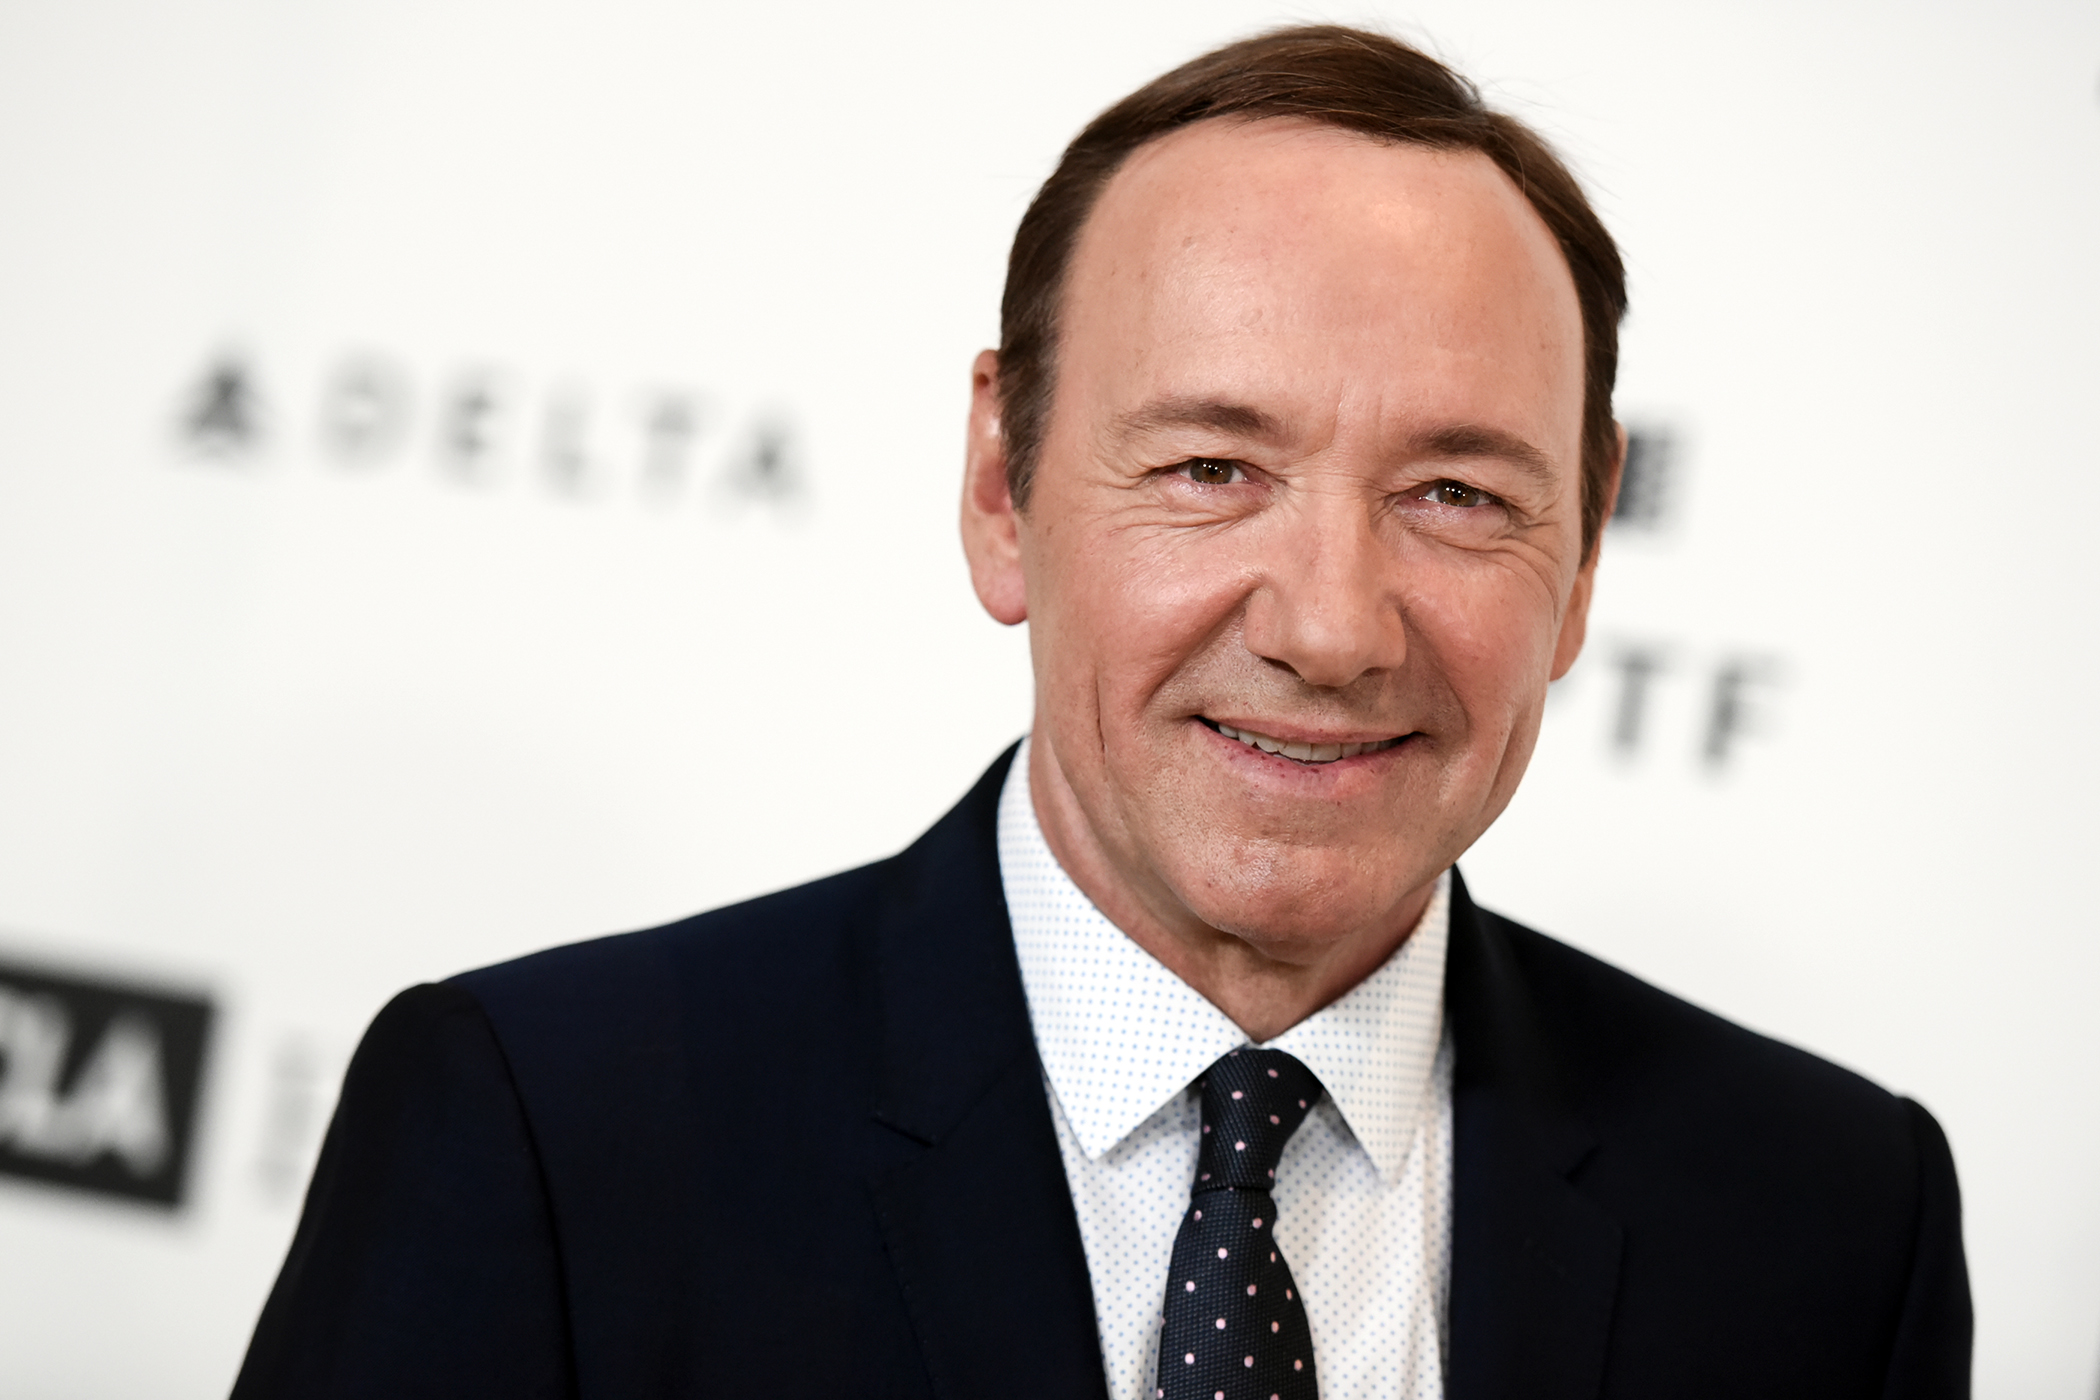 Kevin Spacey arrives at the 4th Annual Reel Stories, Real Lives Benefit held at Milk Studios on Saturday, April 25, 2015, in Los Angeles.